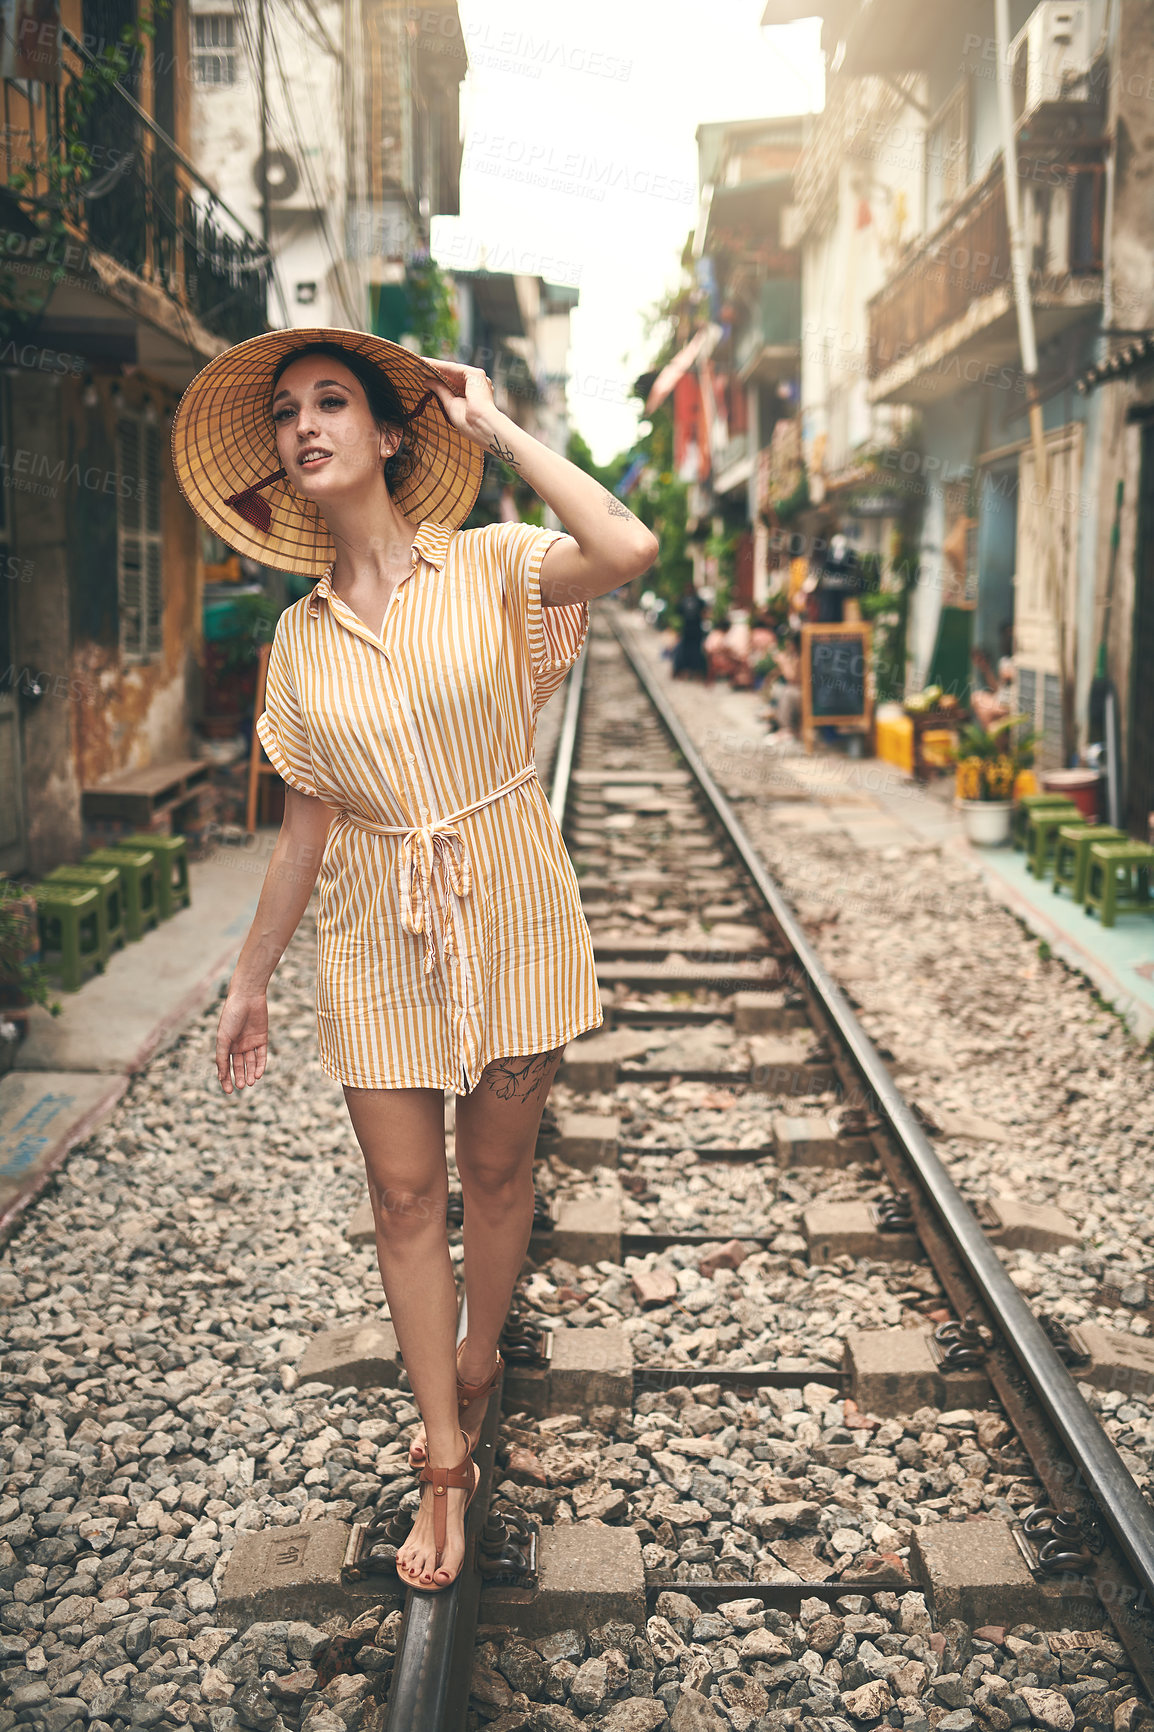 Buy stock photo Shot of a young woman walking on a train tracks through the streets of Vietnam